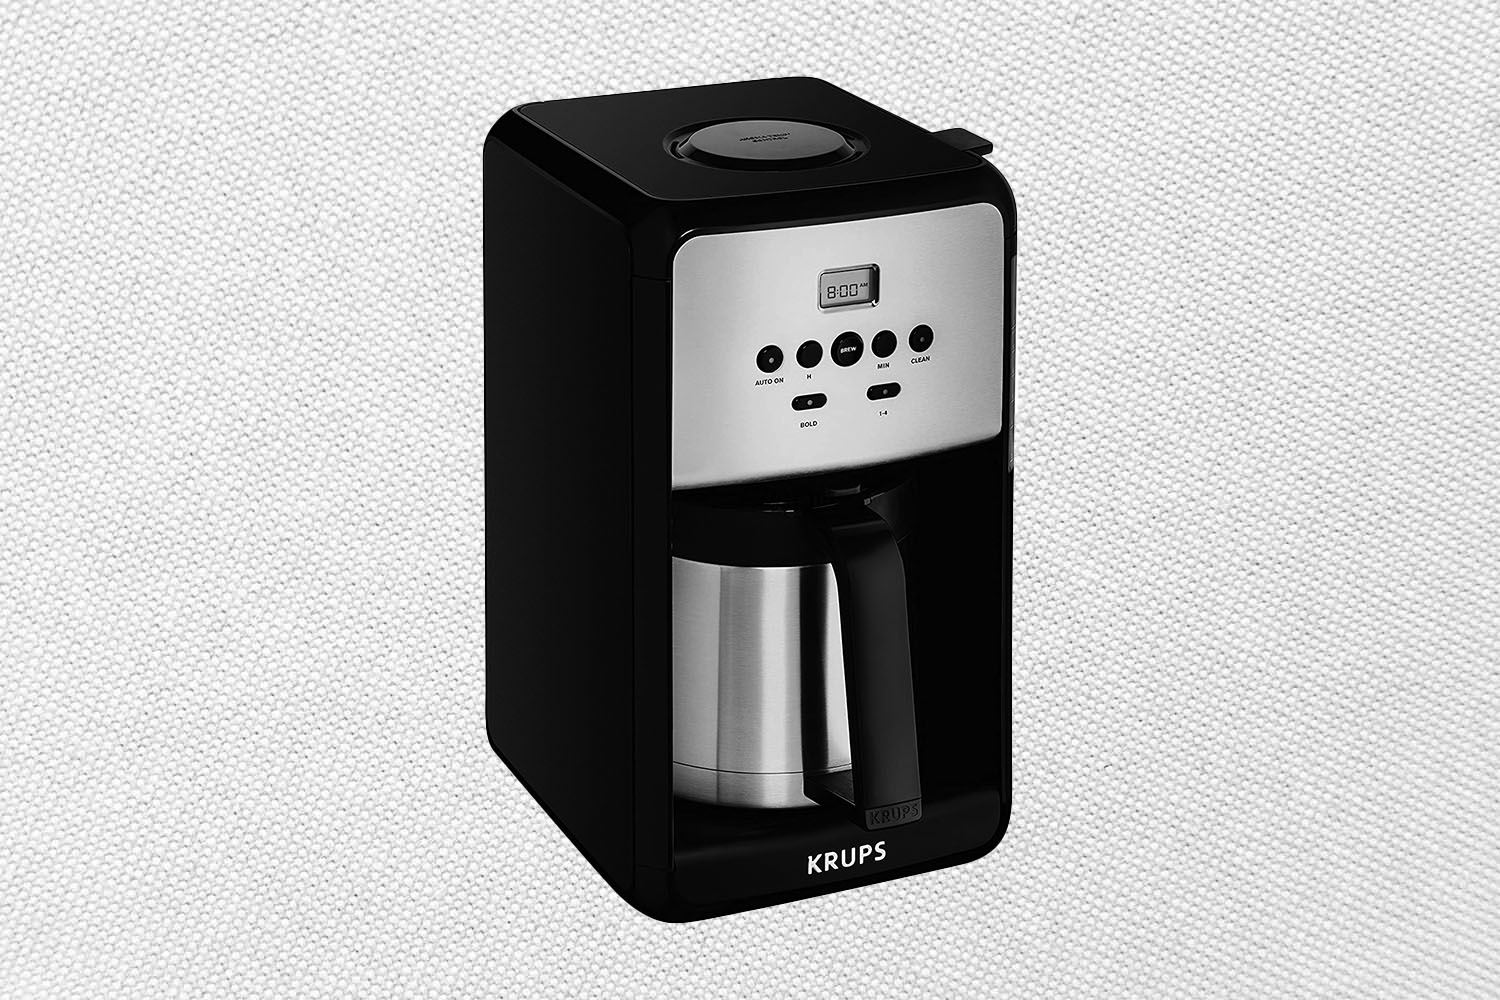 The KRUPS ET351 Coffee Maker on a white patterned background